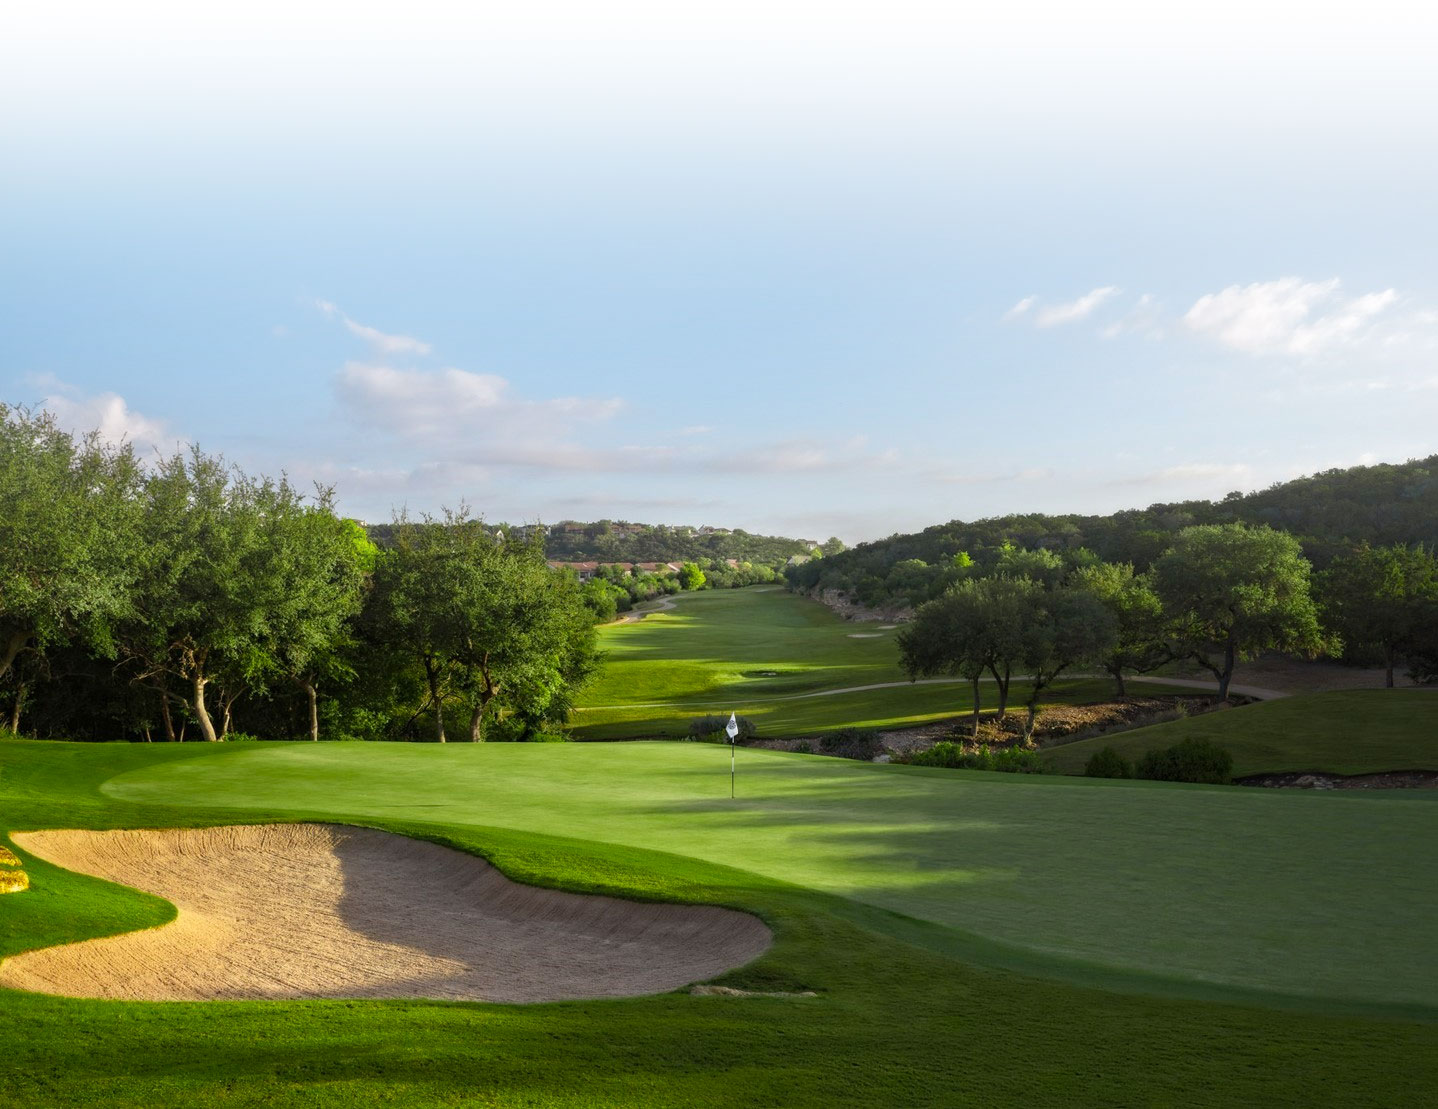 La Cantera Hill Country Resort to Undergo Five-Month Renovation